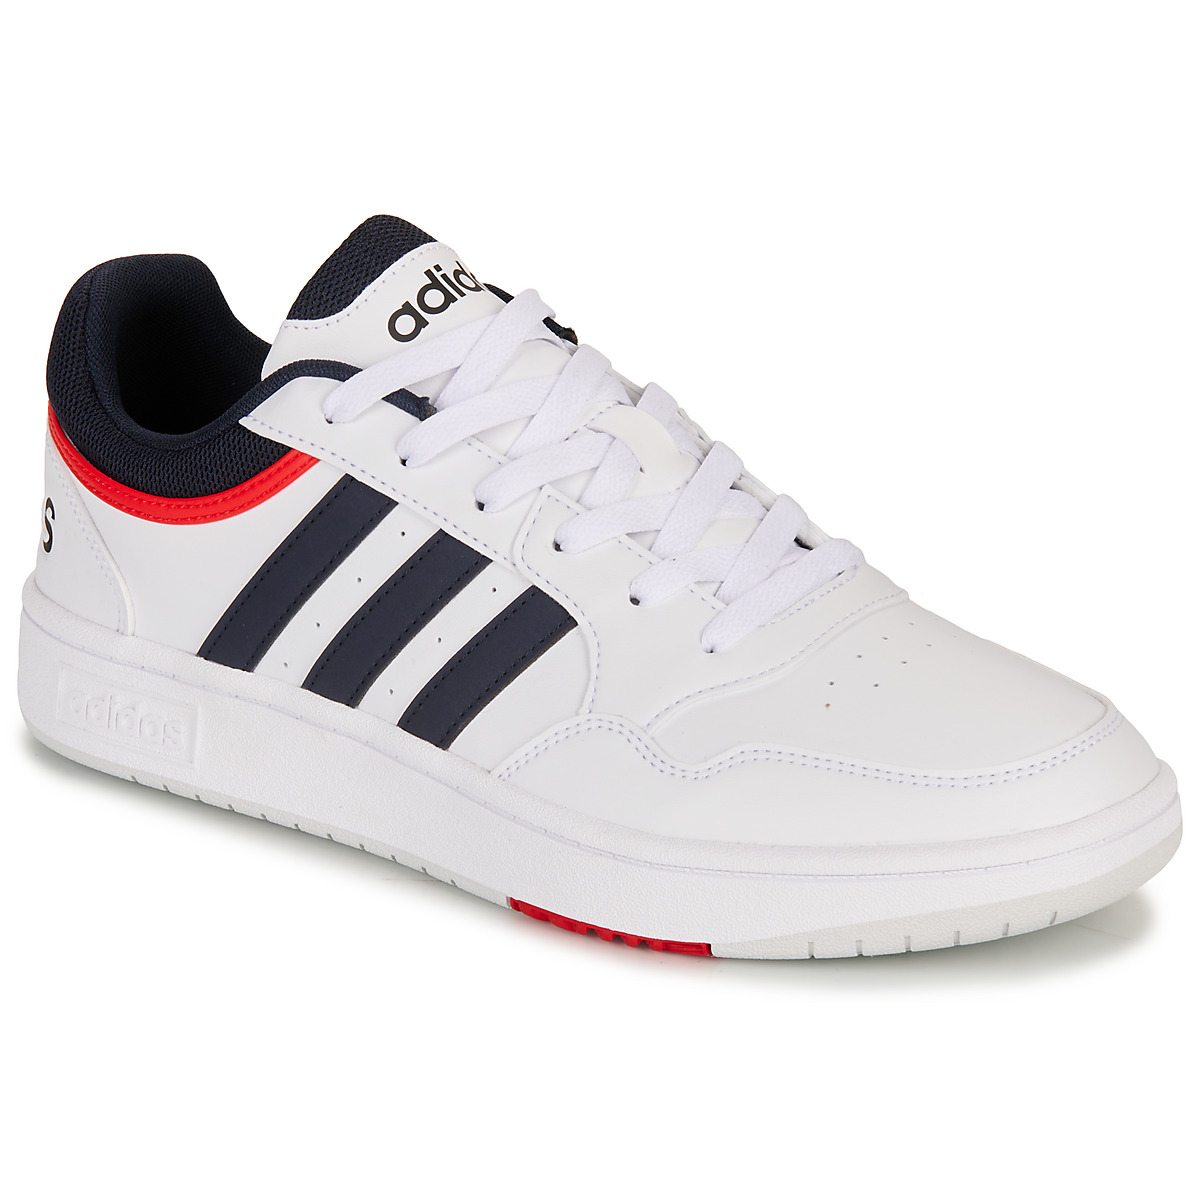 Chaussures Homme adidas X Speedflow FG 11 11 Singles Day HOOPS 3.0 Blanc / Marine / Rouge